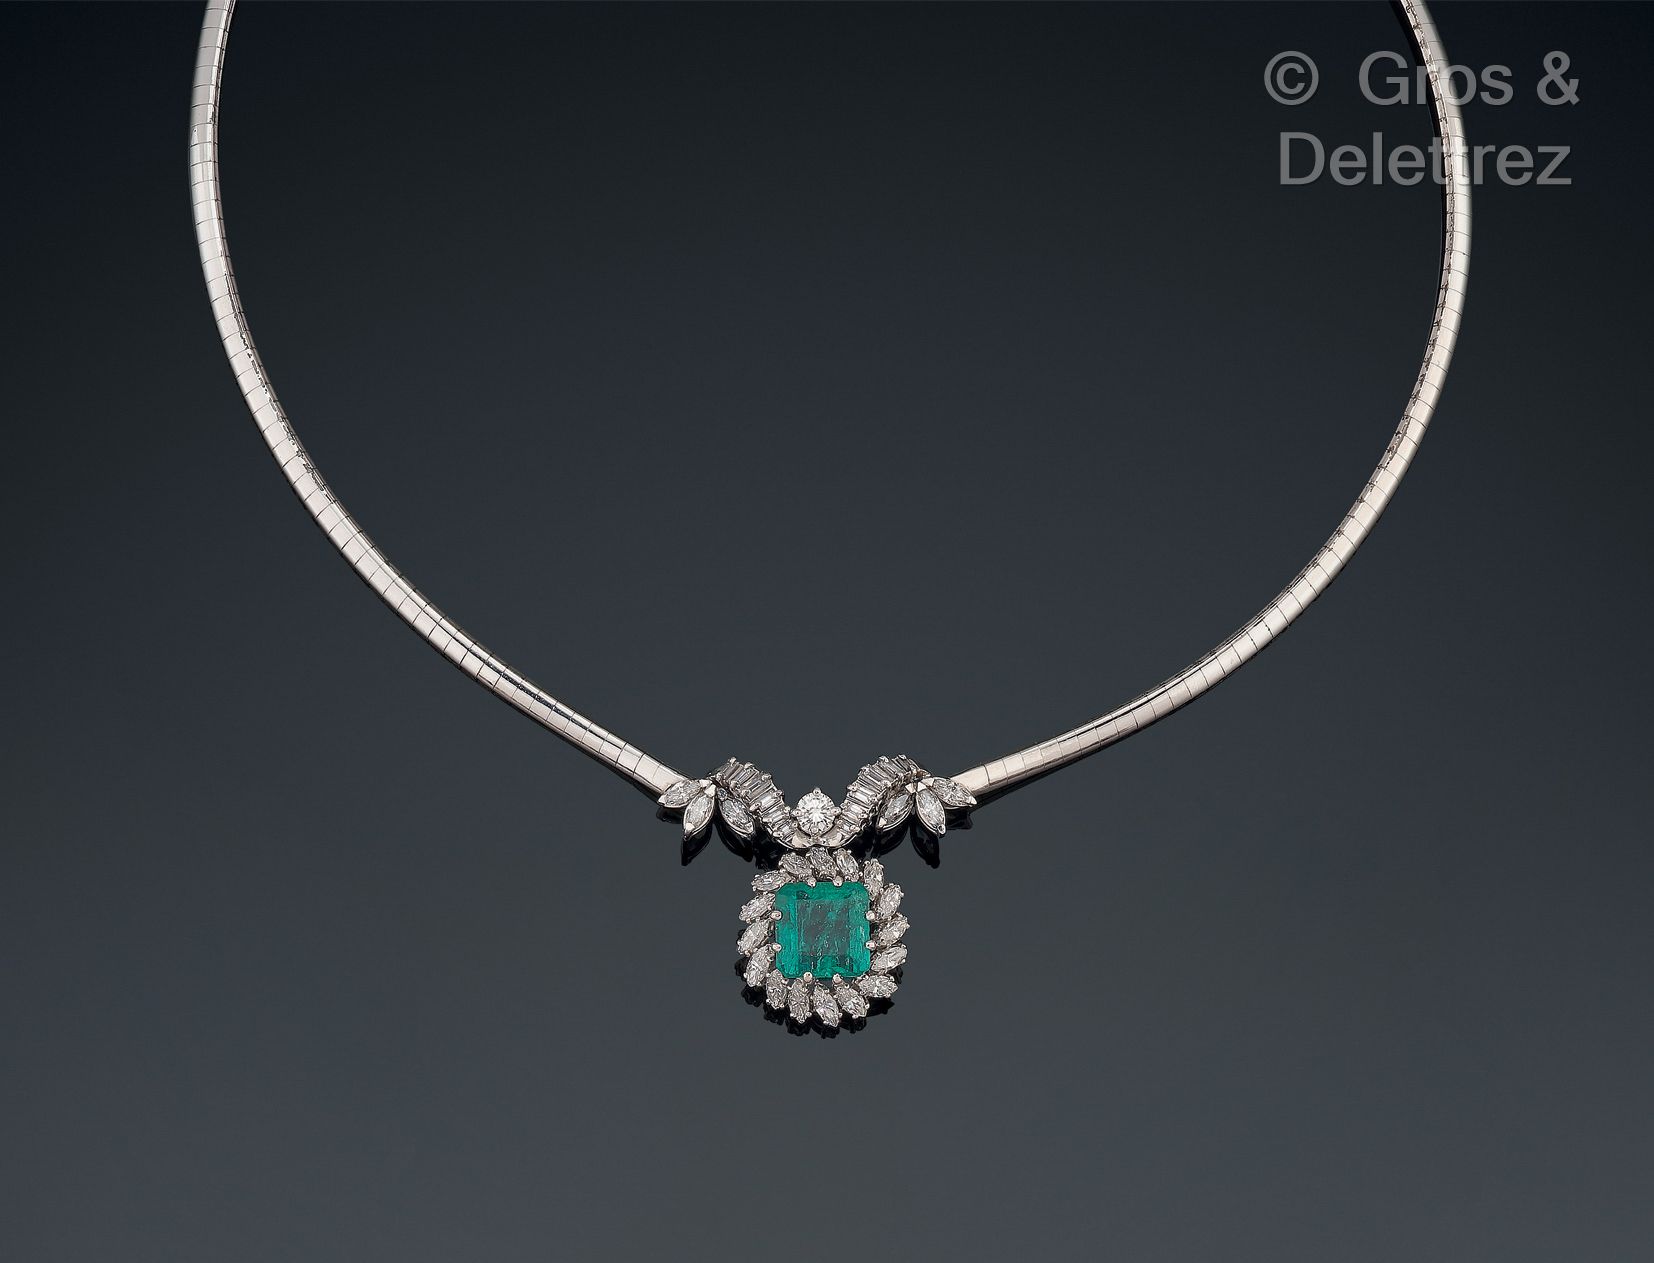 Null Italian work - Semi-rigid necklace in 750 thousandths white gold with Omega&hellip;